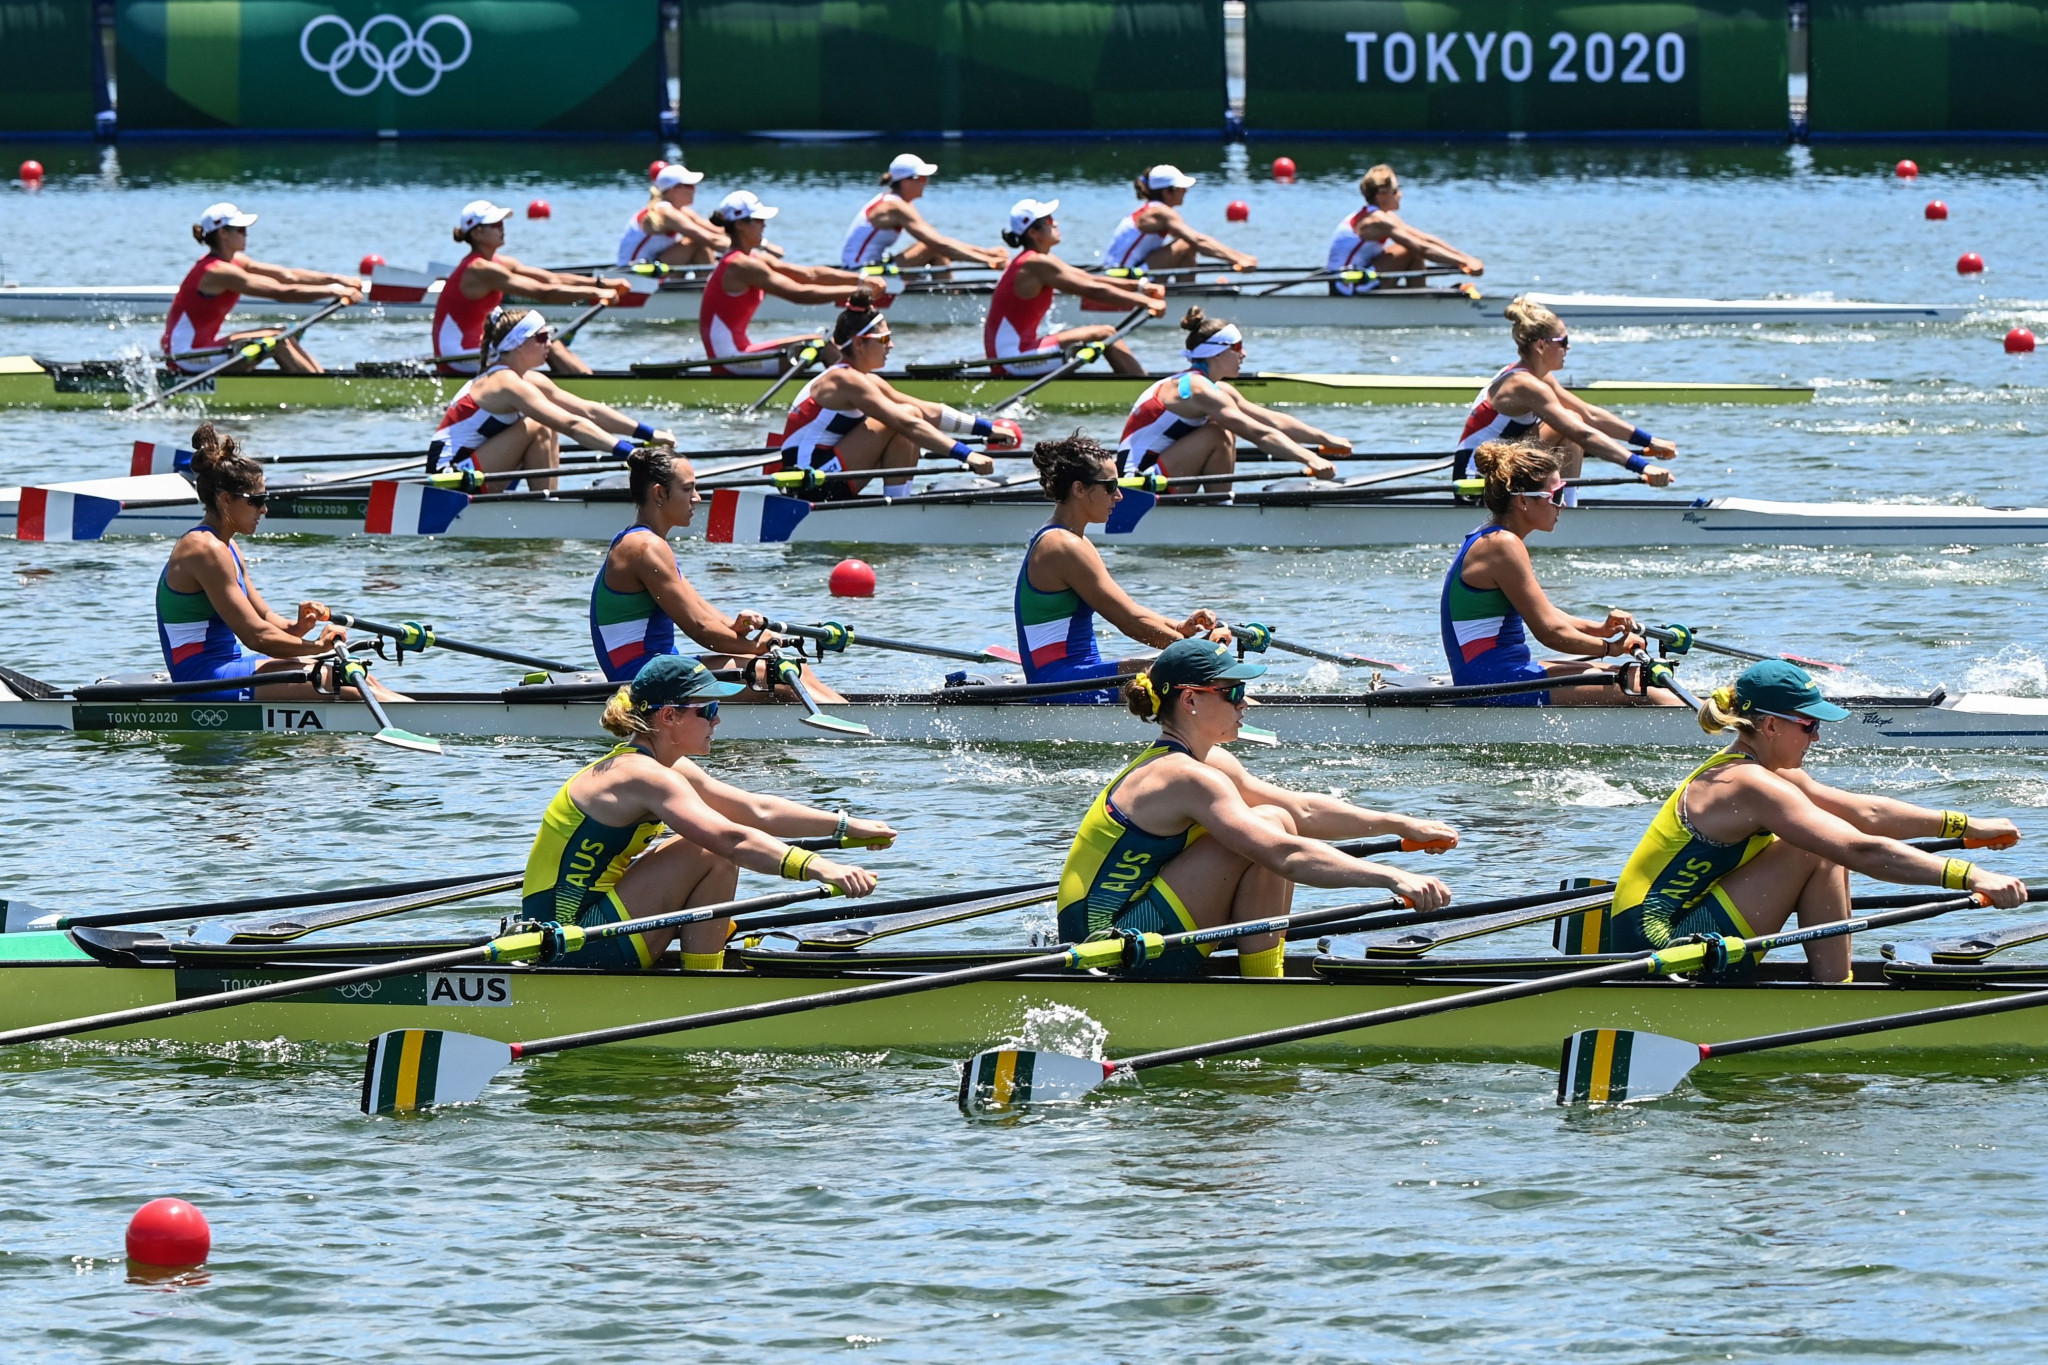 World Rowing says the change has been made to 